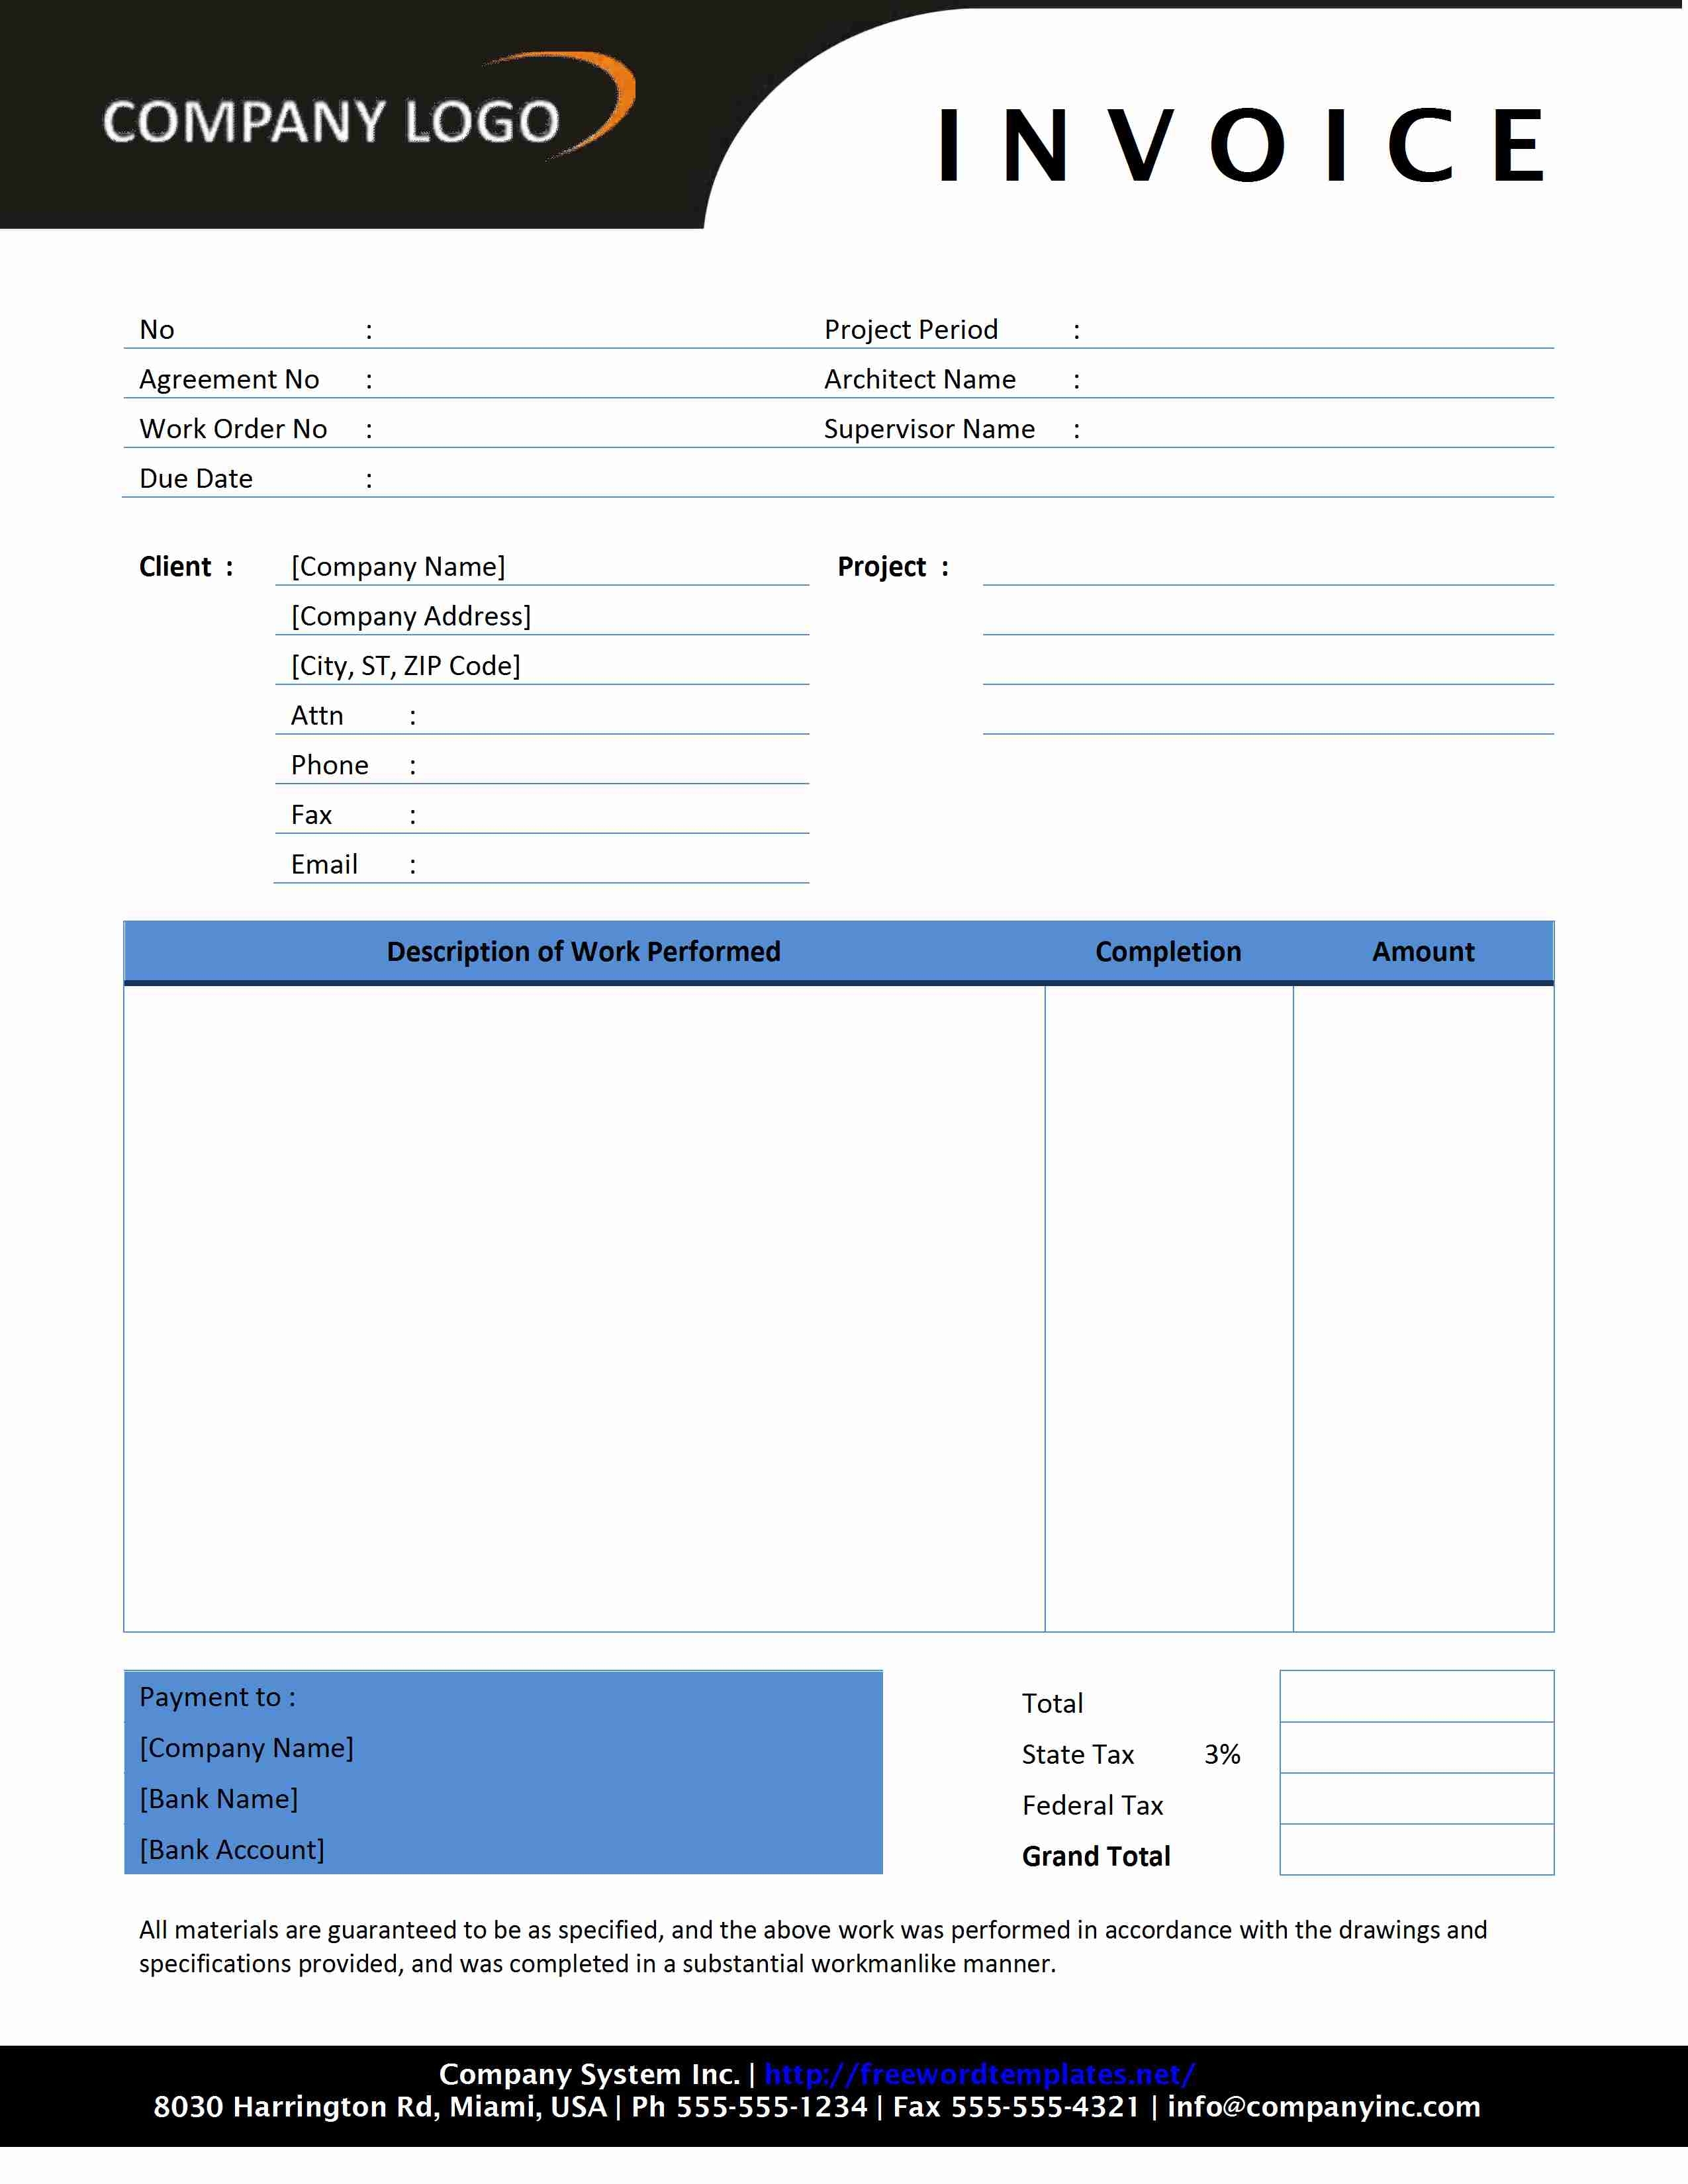 microsoft excel 2007 invoice templates free download